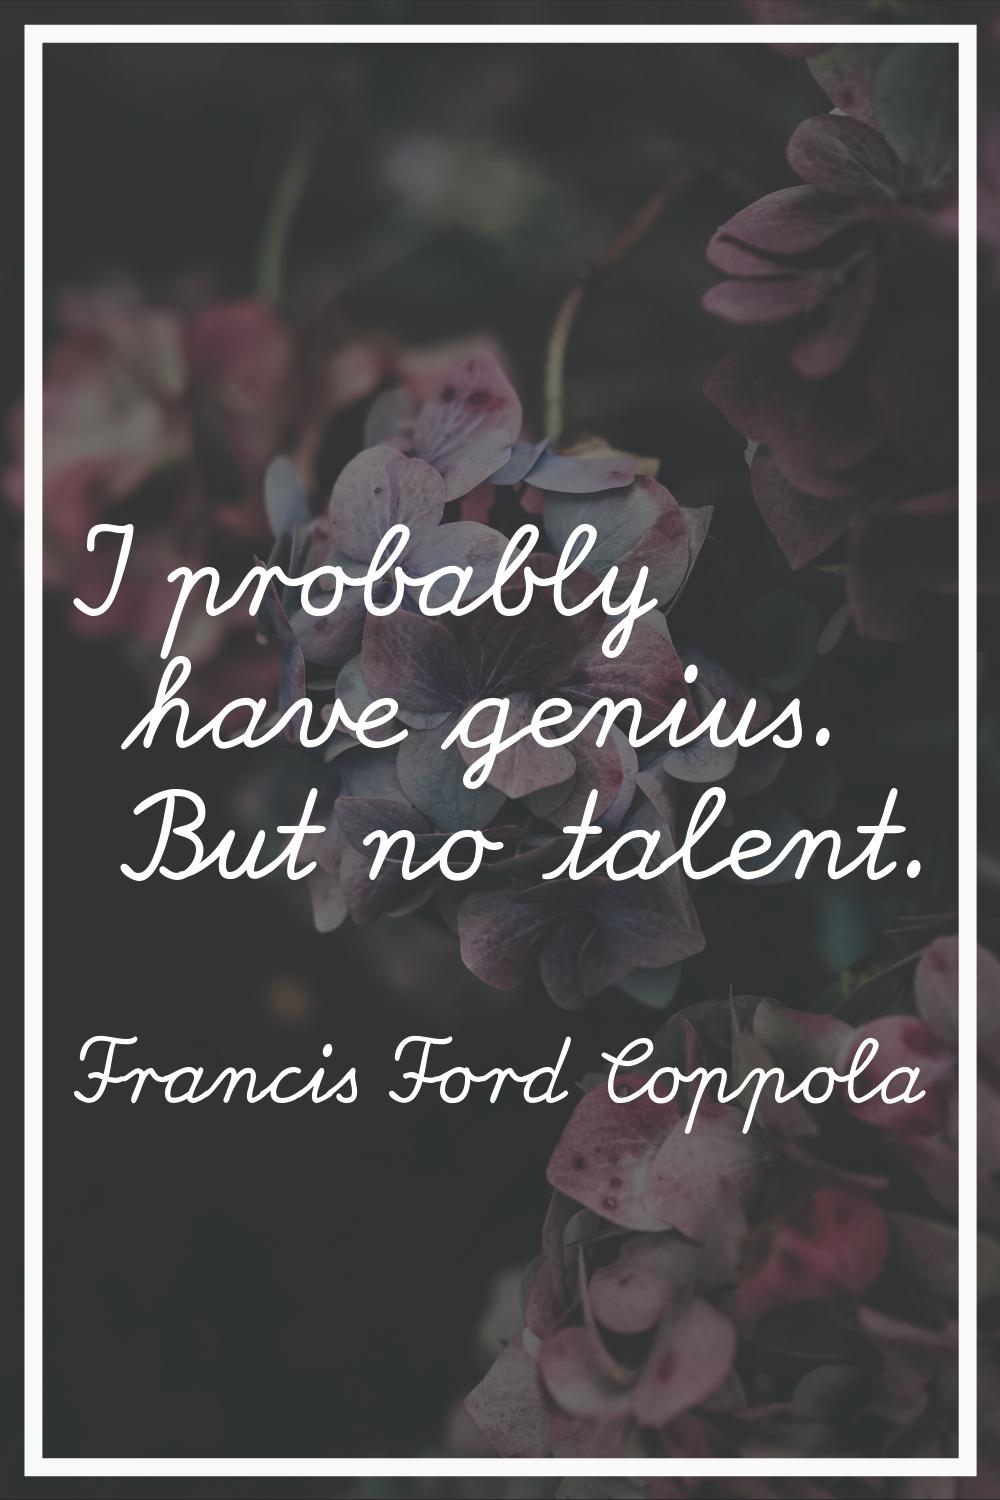 I probably have genius. But no talent.